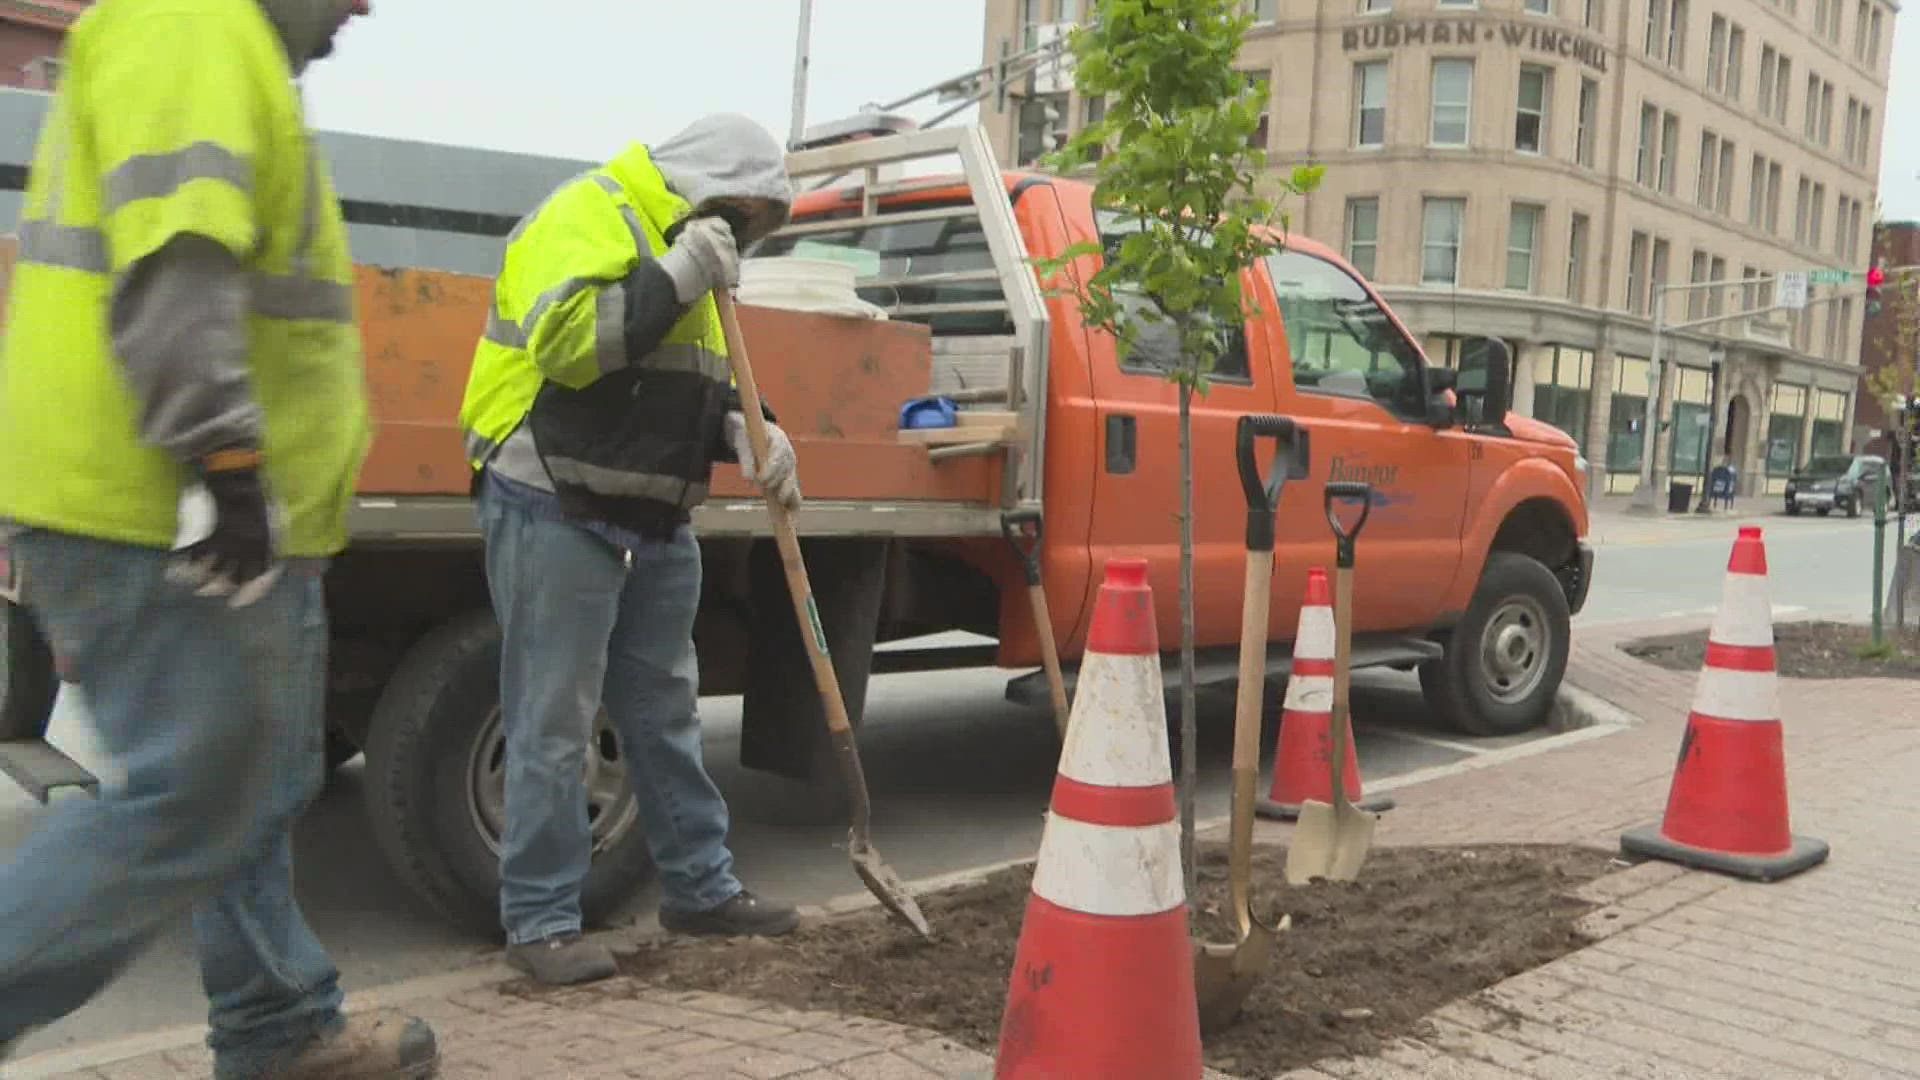 City of Bangor officials celebrated Arbor Day on Friday by planting a tree in front of City Hall.